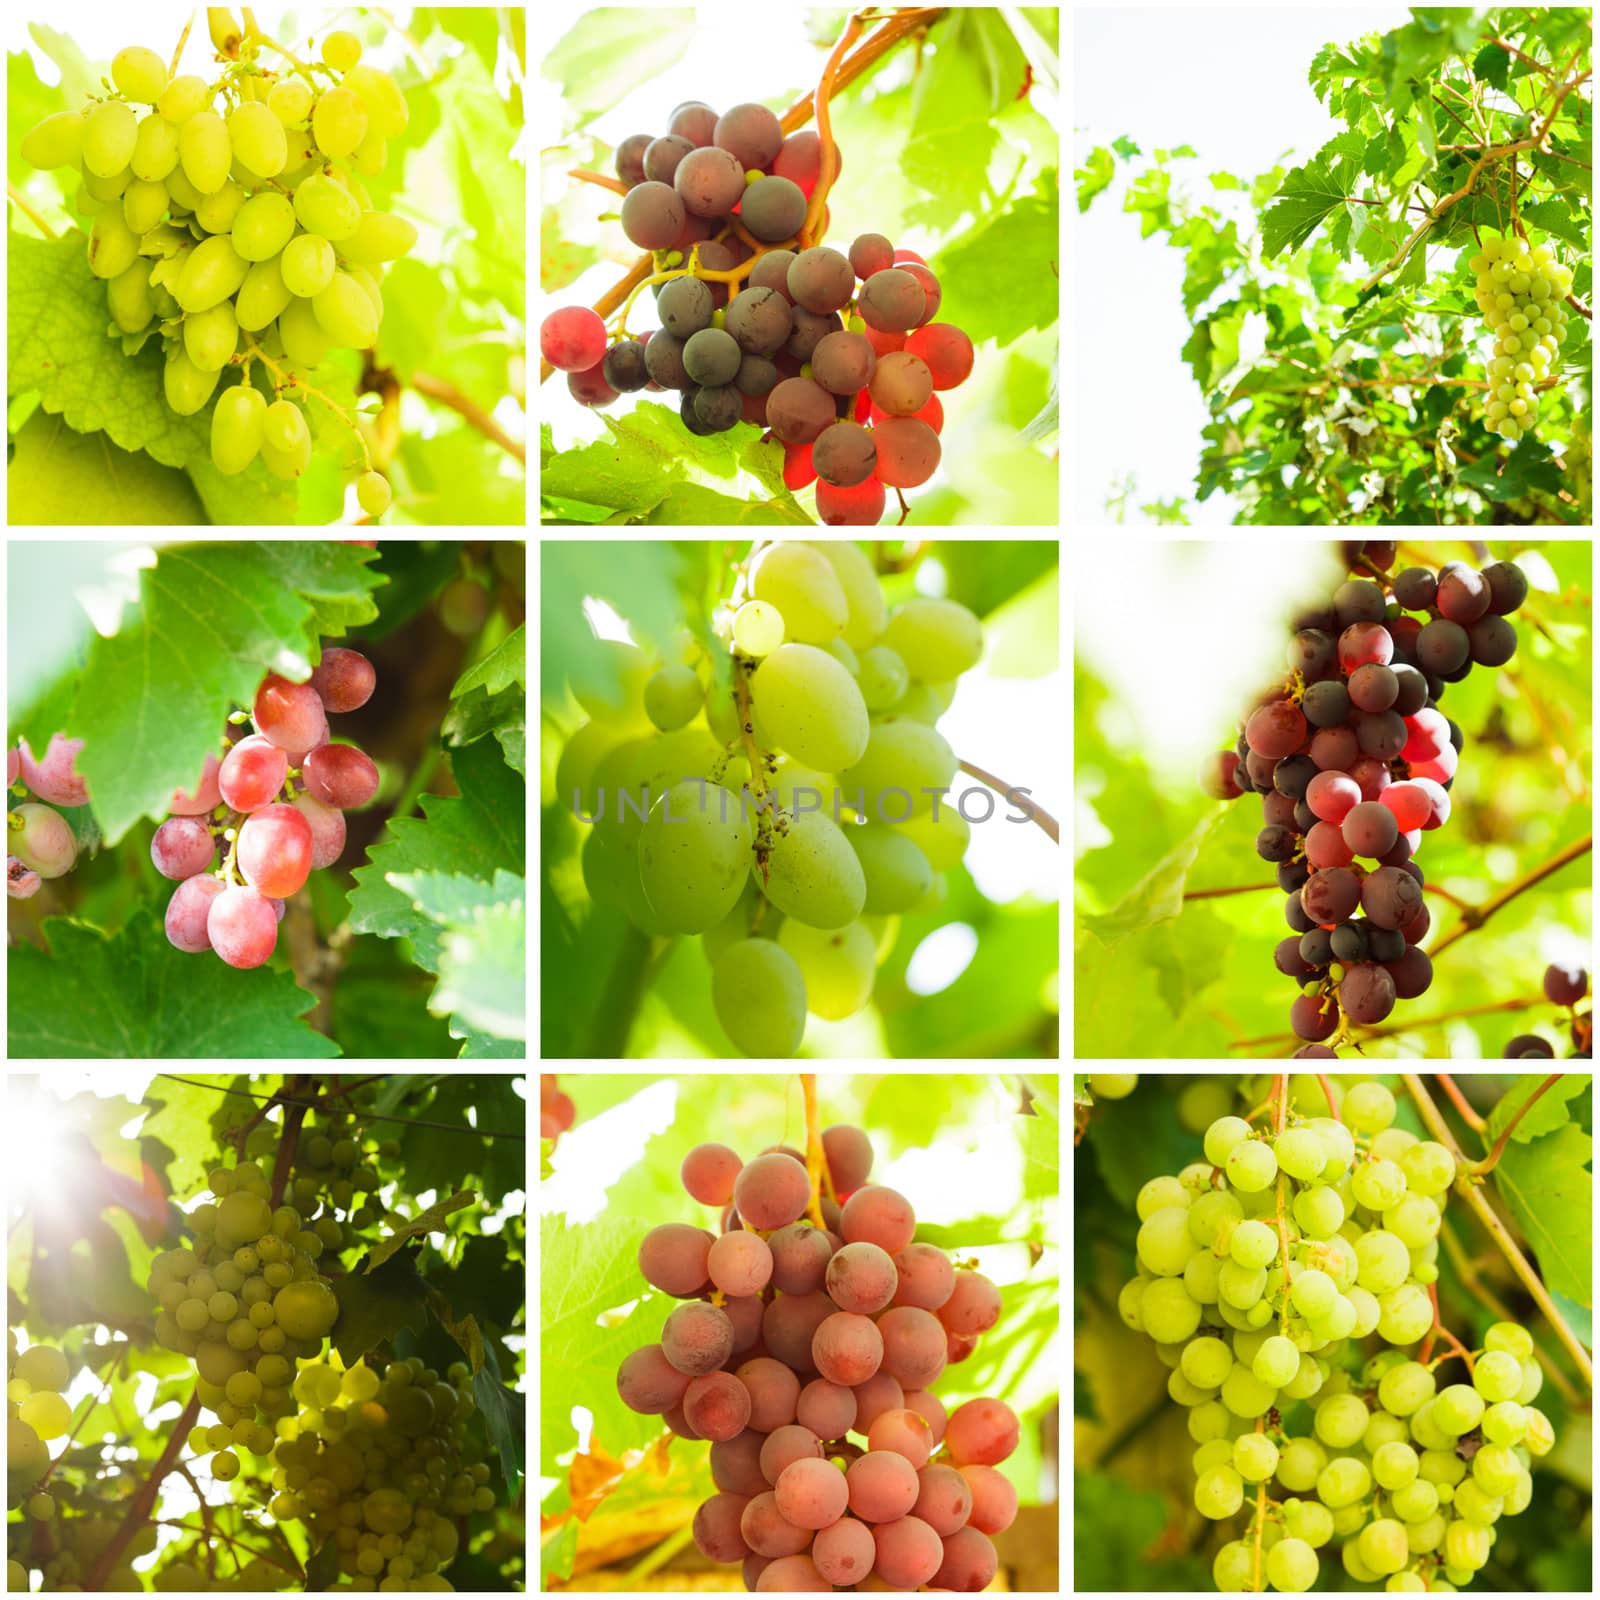 Grapevine collage by oksix